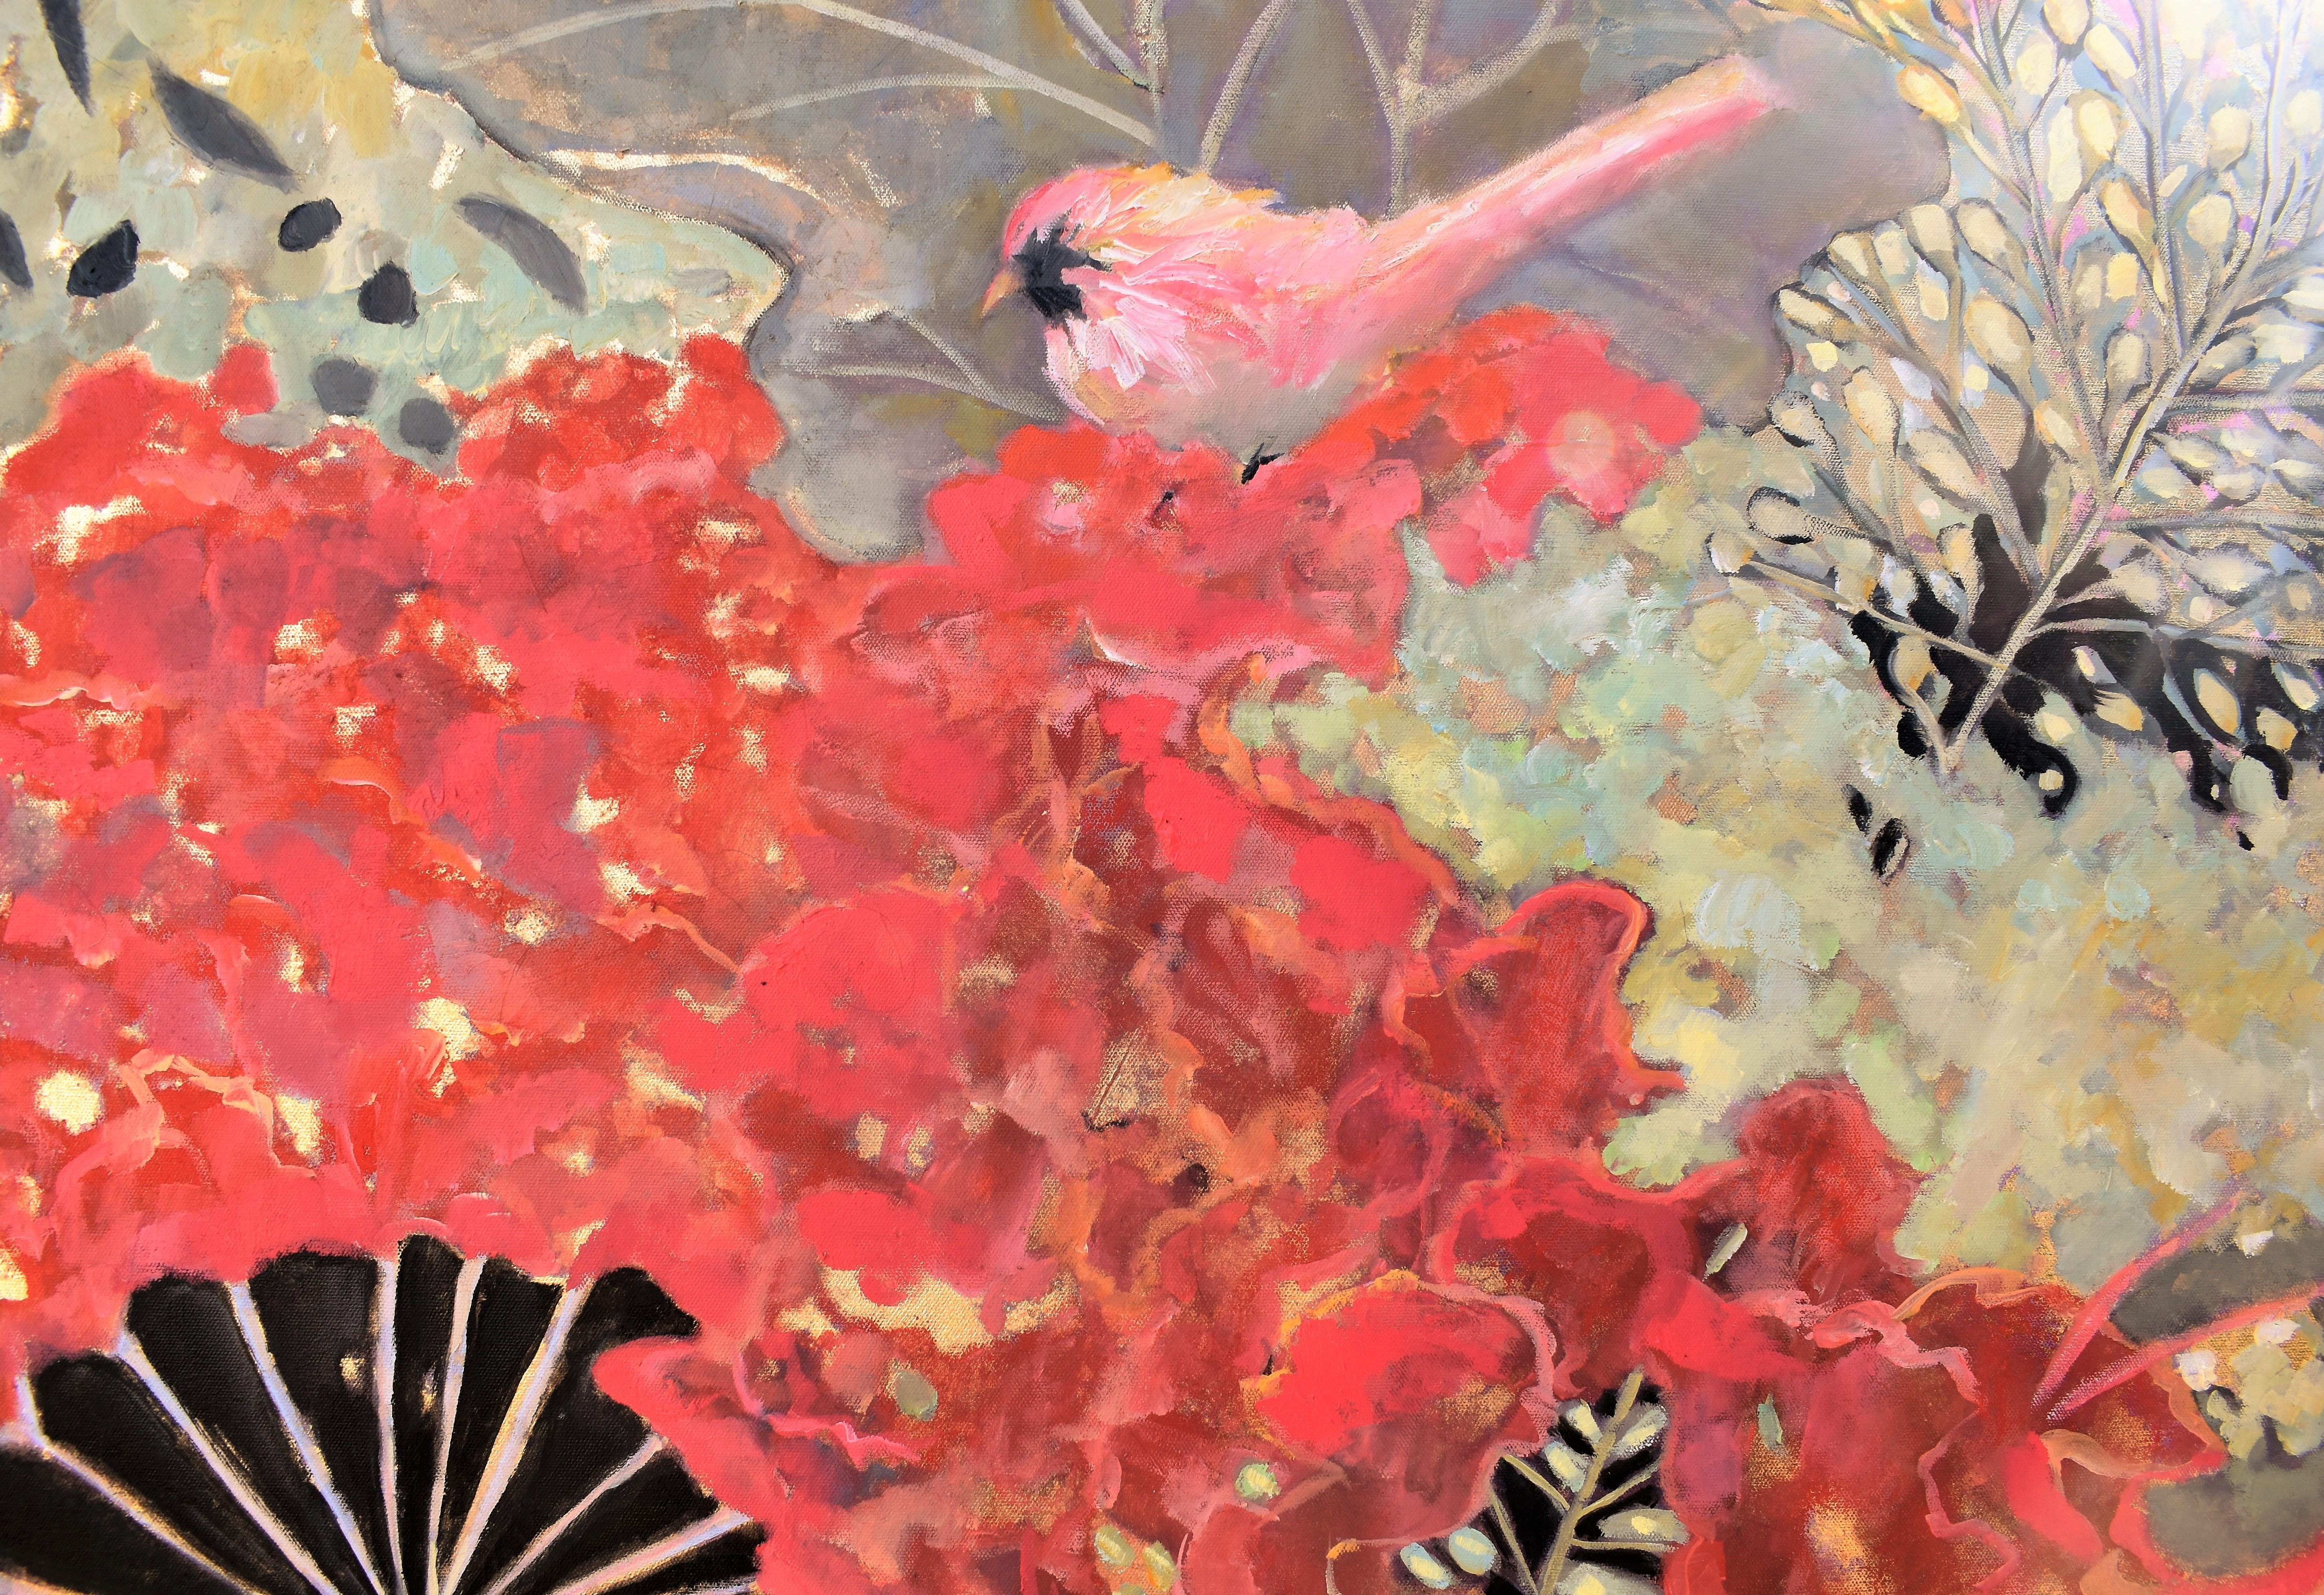 <p>Artist Comments<br>Inspired by her best-loved subject, artist Mary Pratt paints a pink bird resting on a bed of brilliant flora with surrounding gold leaf patterning. The warm hues flow harmoniously with the luminous sheen, in contrast to the